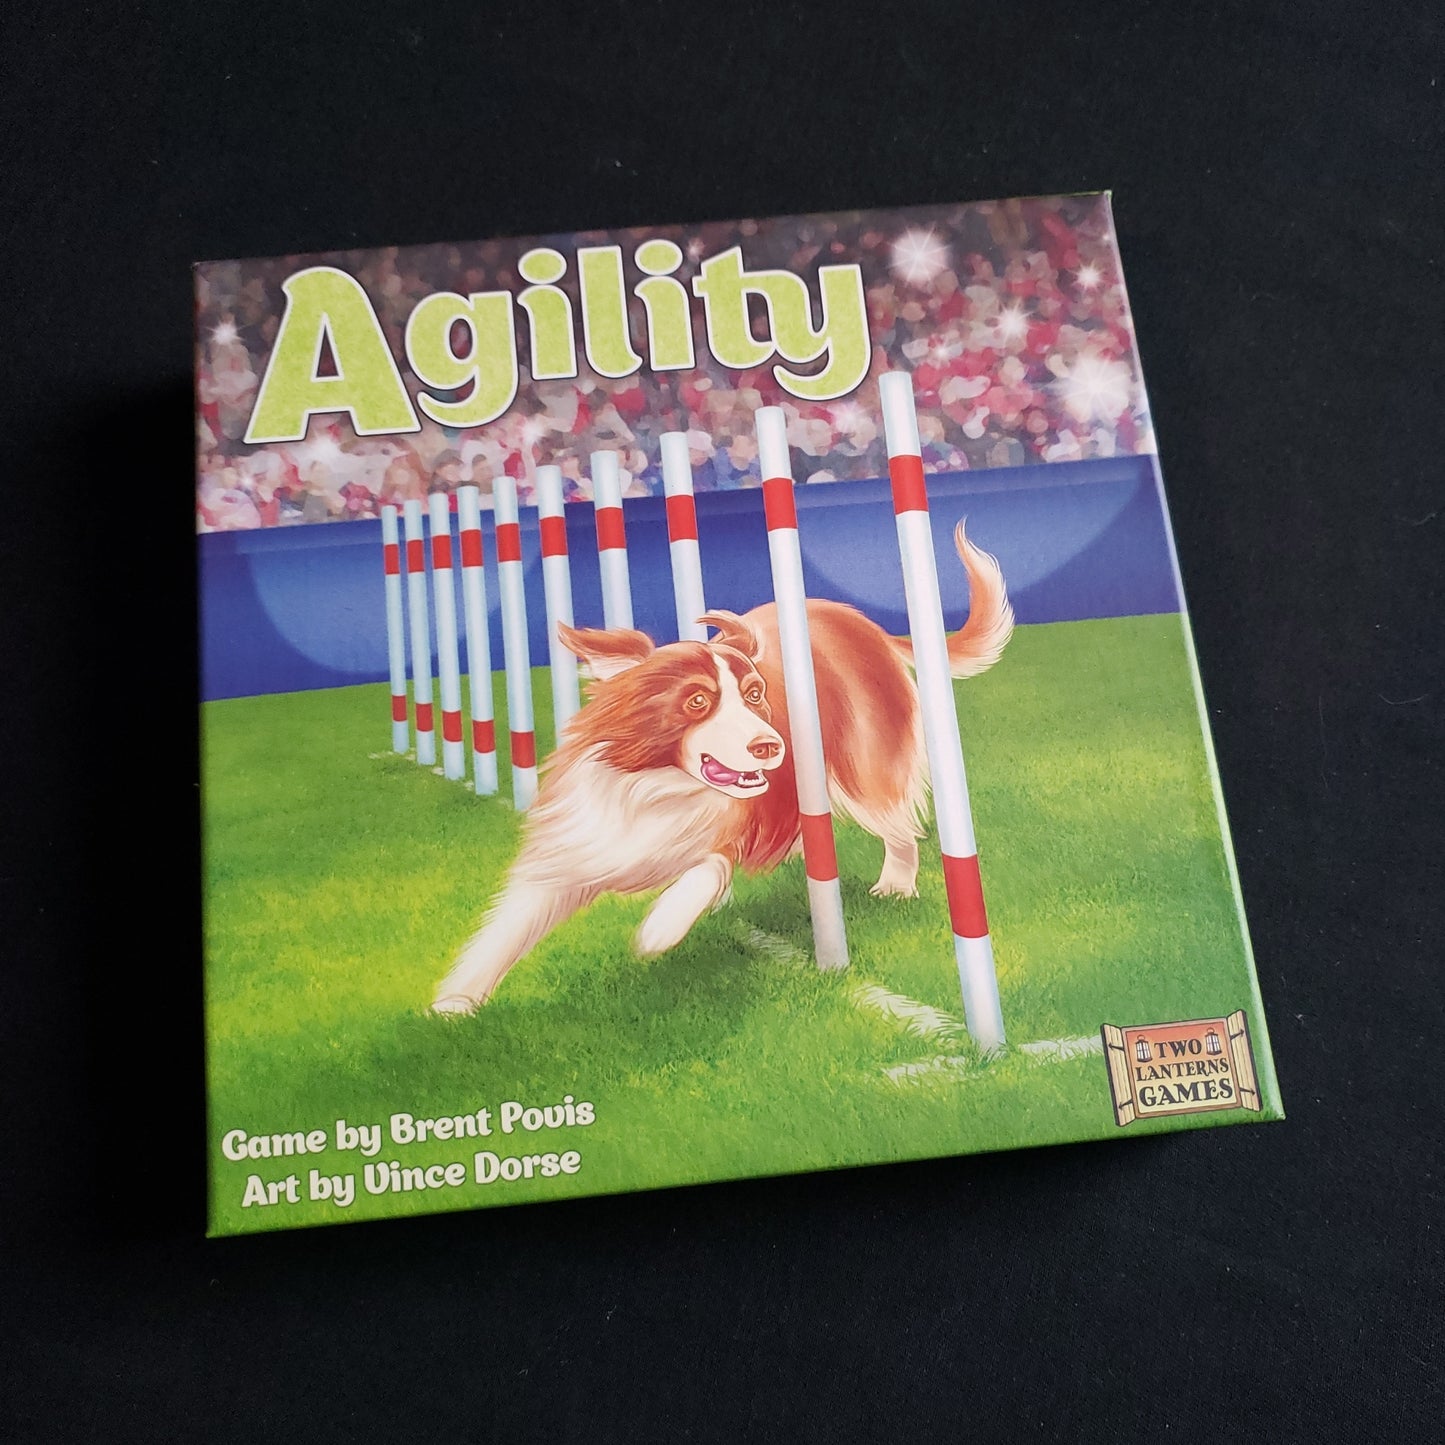 Image shows the front cover of the box of the Agility board game